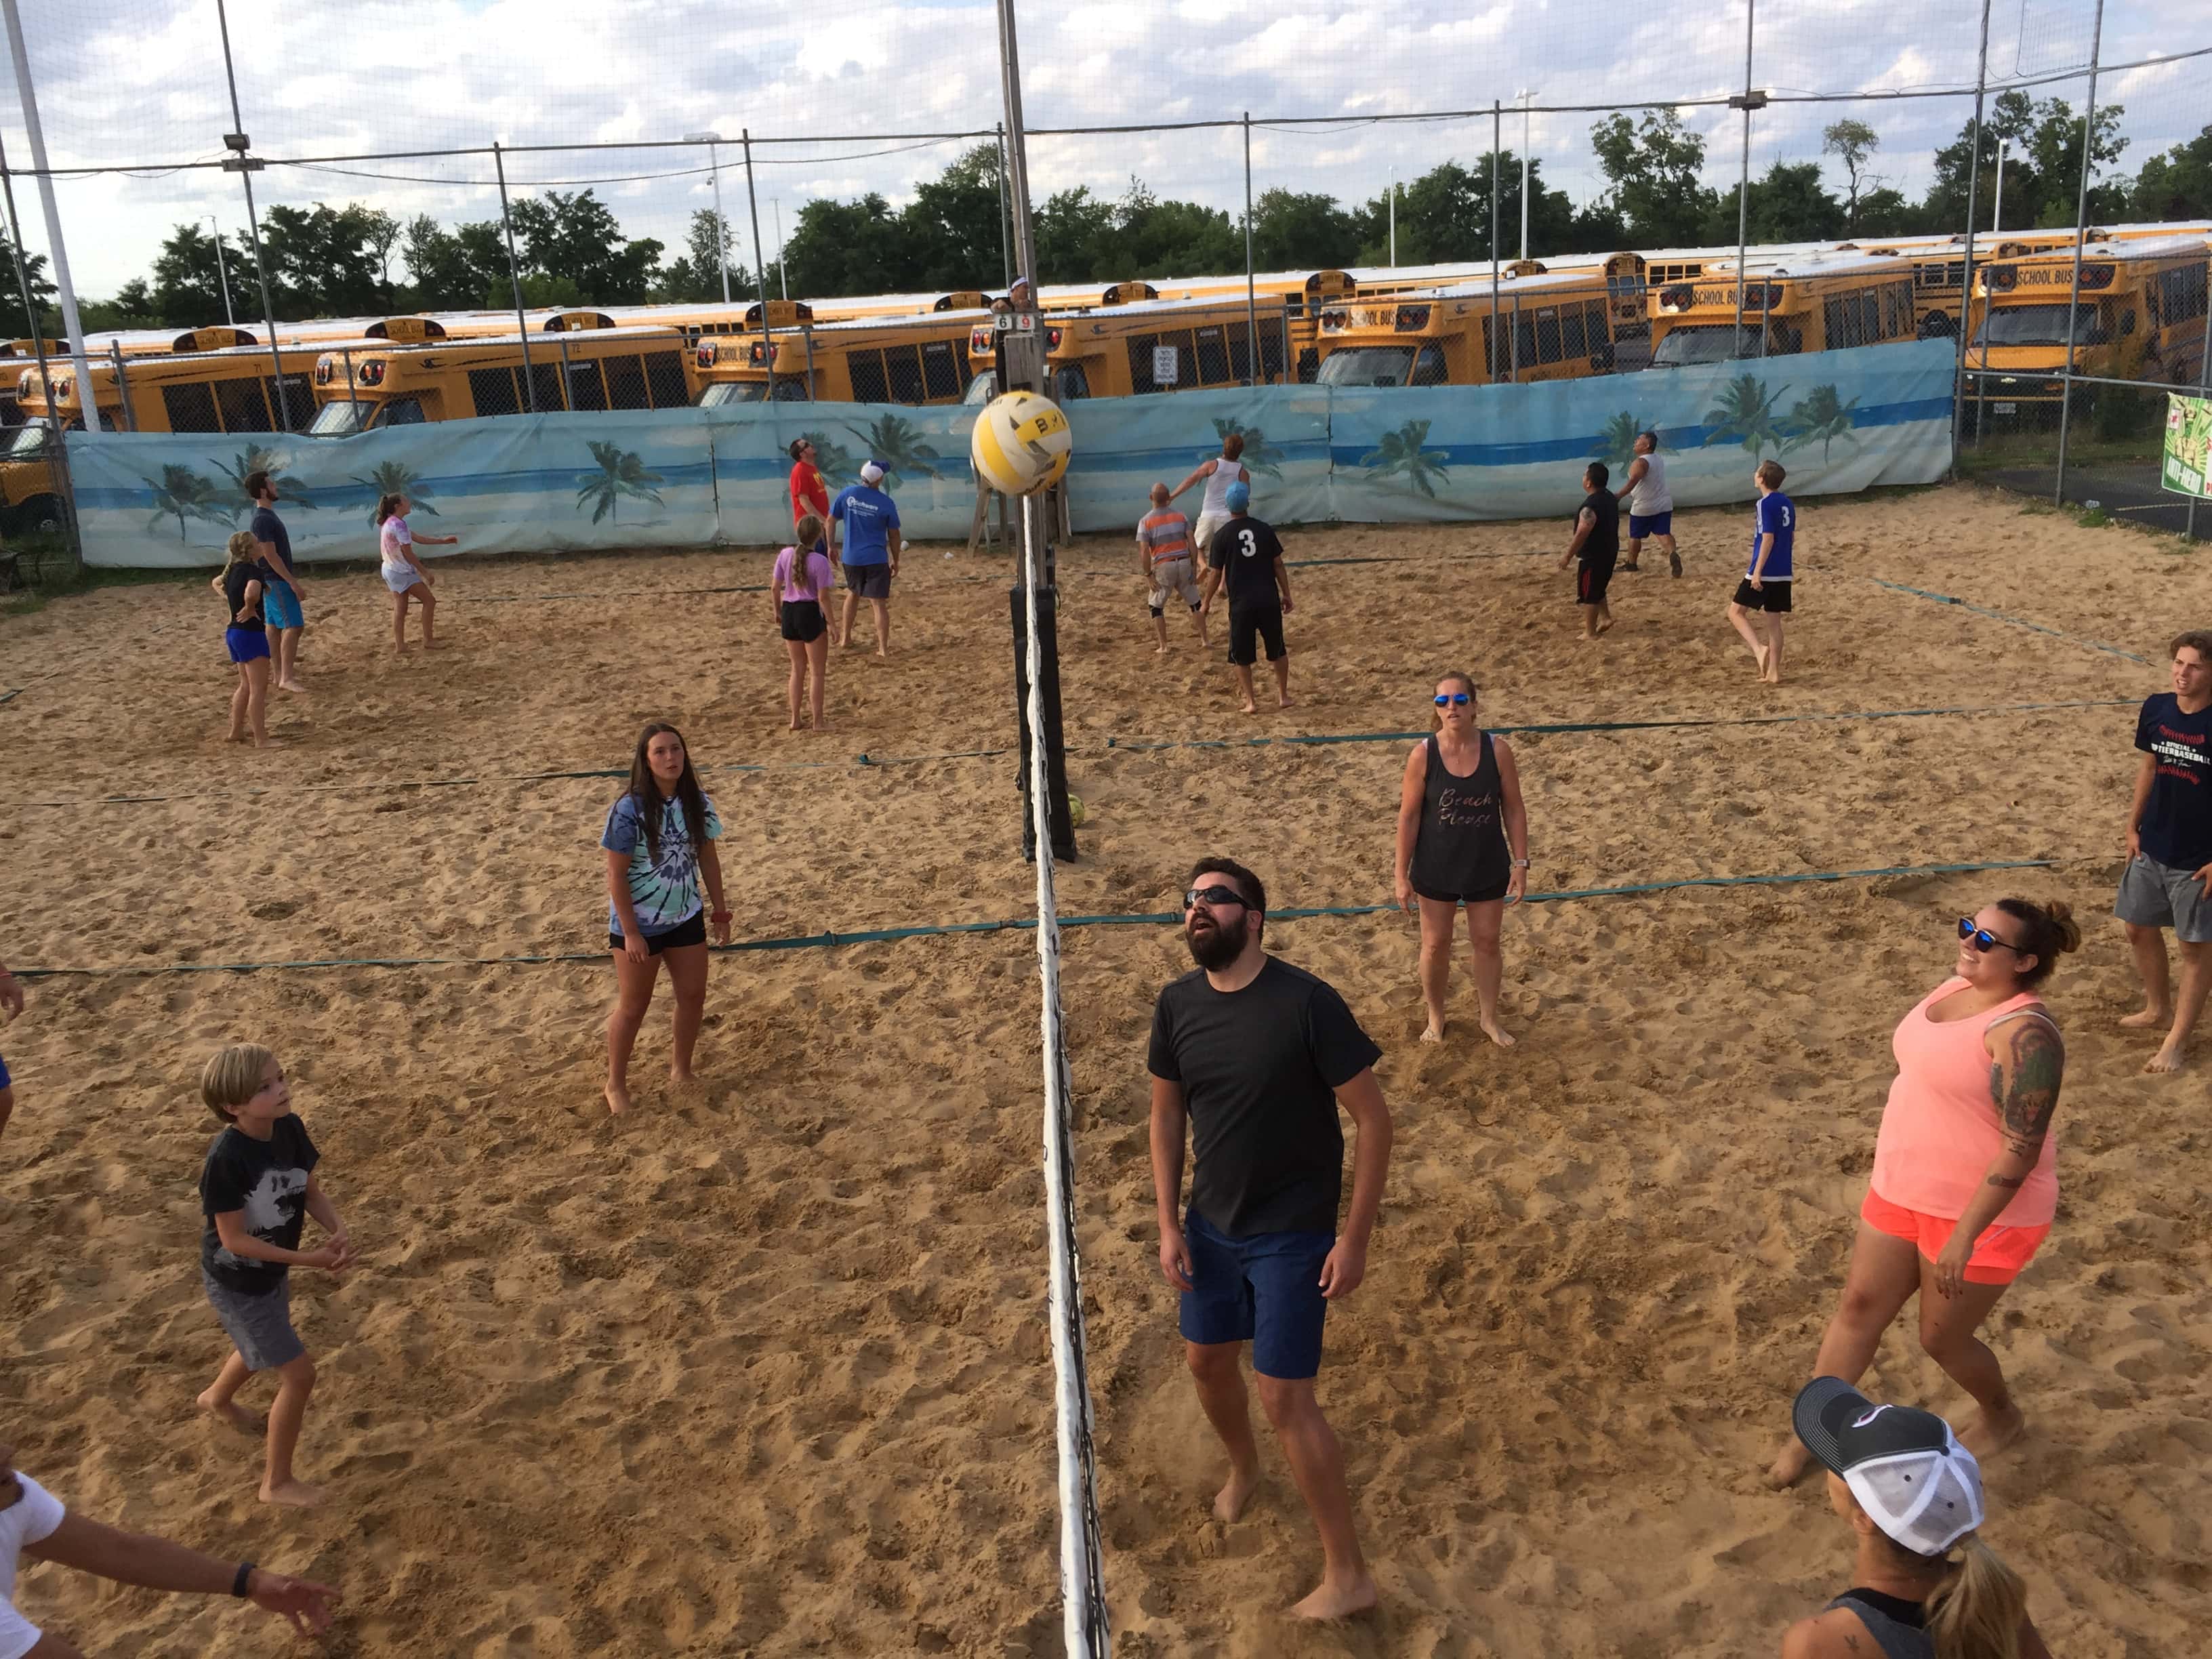 volleyball-league